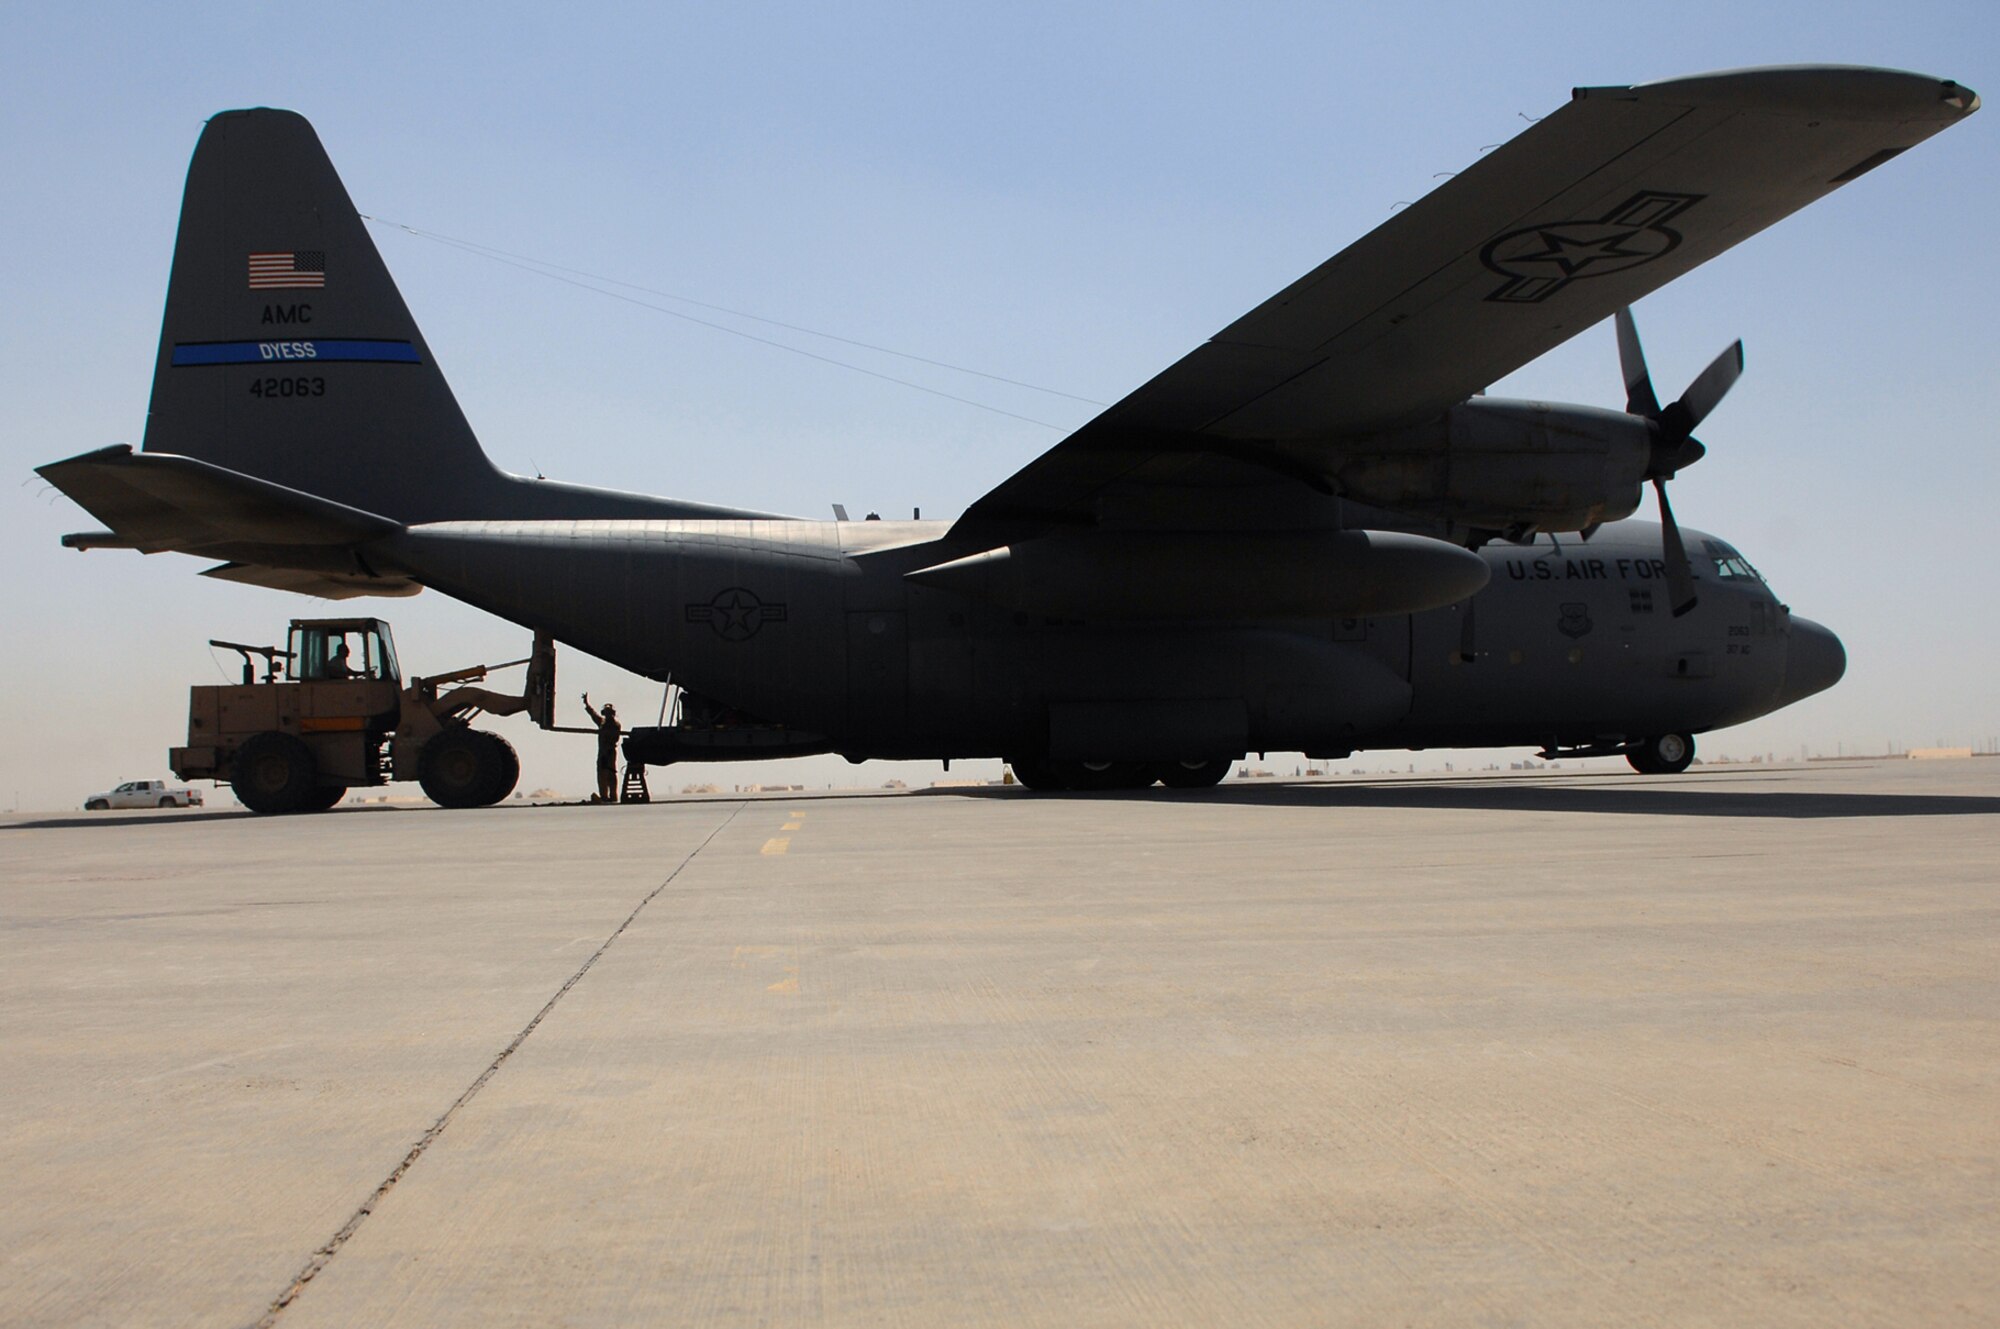 BALAD AIR BASE, Iraq --Cargo is loaded onto a C-130 Hercules here, May 10. The 777th Expeditionary Airlift Squadron personnel estimate they have prevented approximately 10,000 convoy vehicles and about 27,000 servicemembers from traveling along improvised explosive device laden Iraqi roads since the squadron stood up in January 2006. This was accomplished by providing air transport via C-130 aircraft, the 'work horse' of the Air Force fleet. (U.S. Air Force photo/ Senior Airman Julianne Showalter)